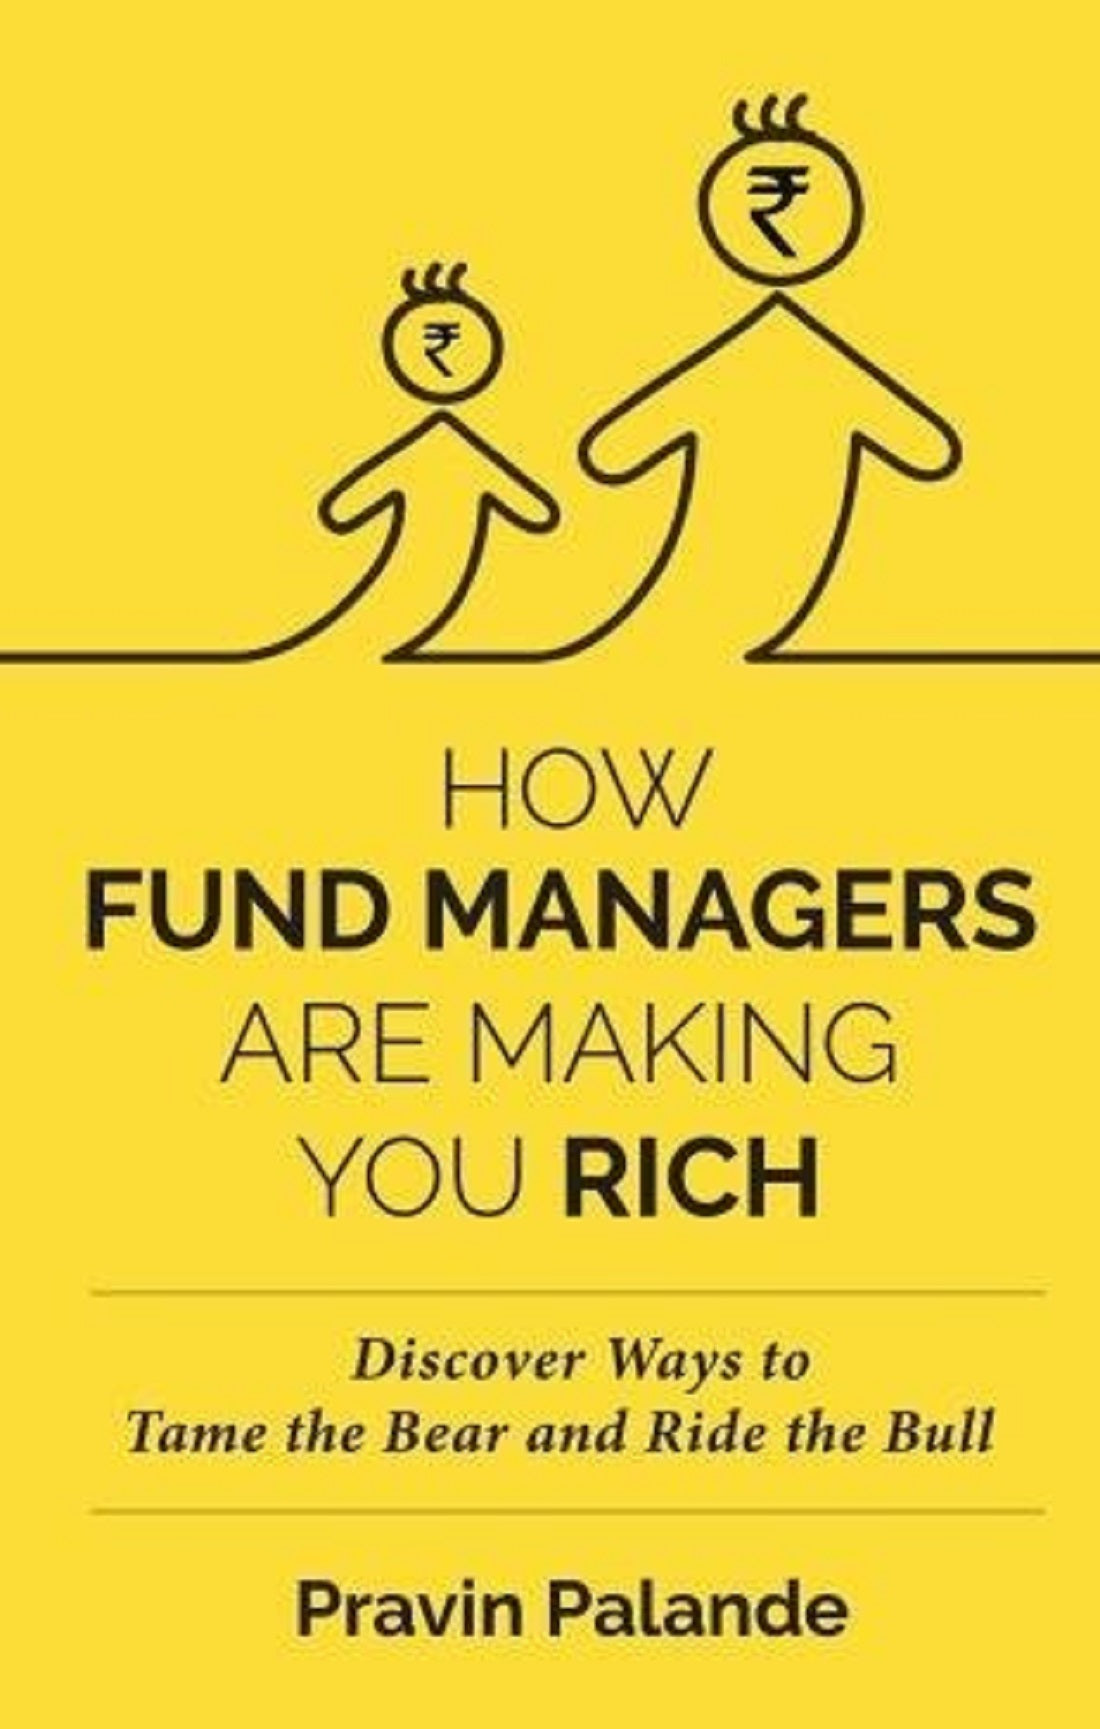 HOW FUND MANAGERS ARE MAKING YOU RICH